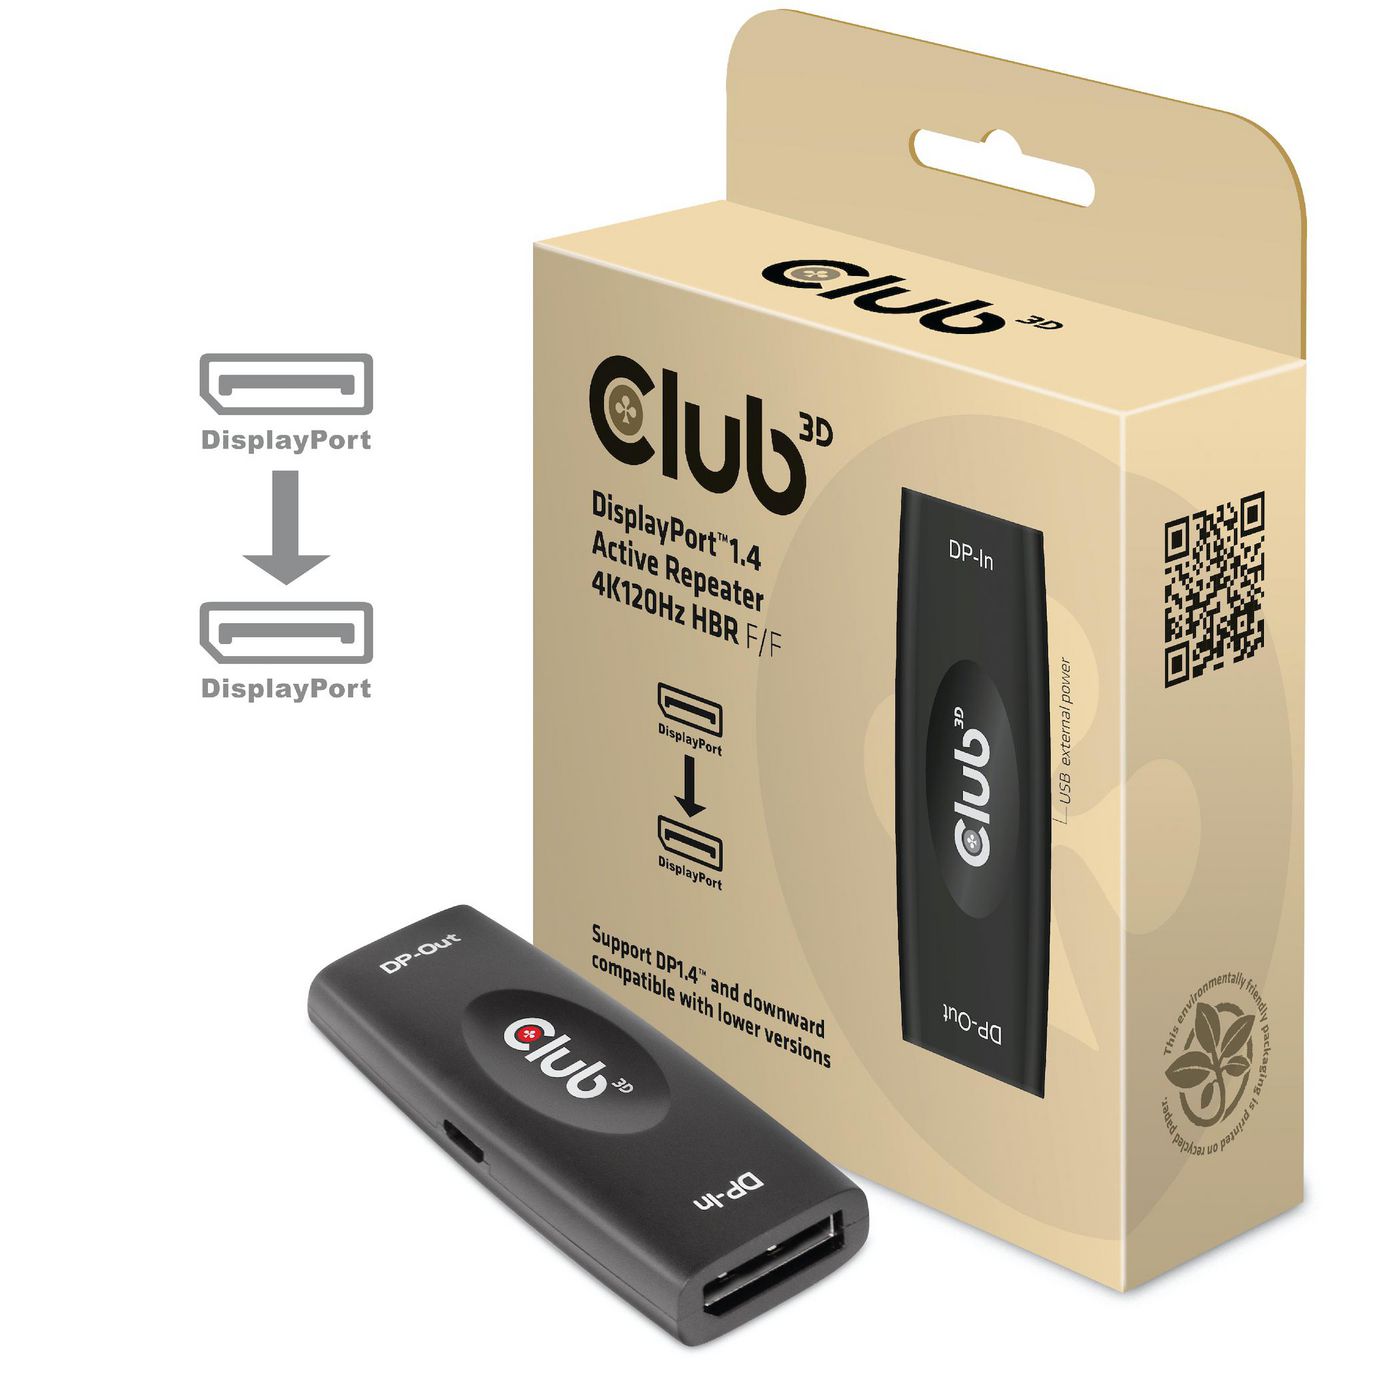 Club3D CAC-1007 W126175647 DP 1.4 4K120HZ HDR ACTIVE 